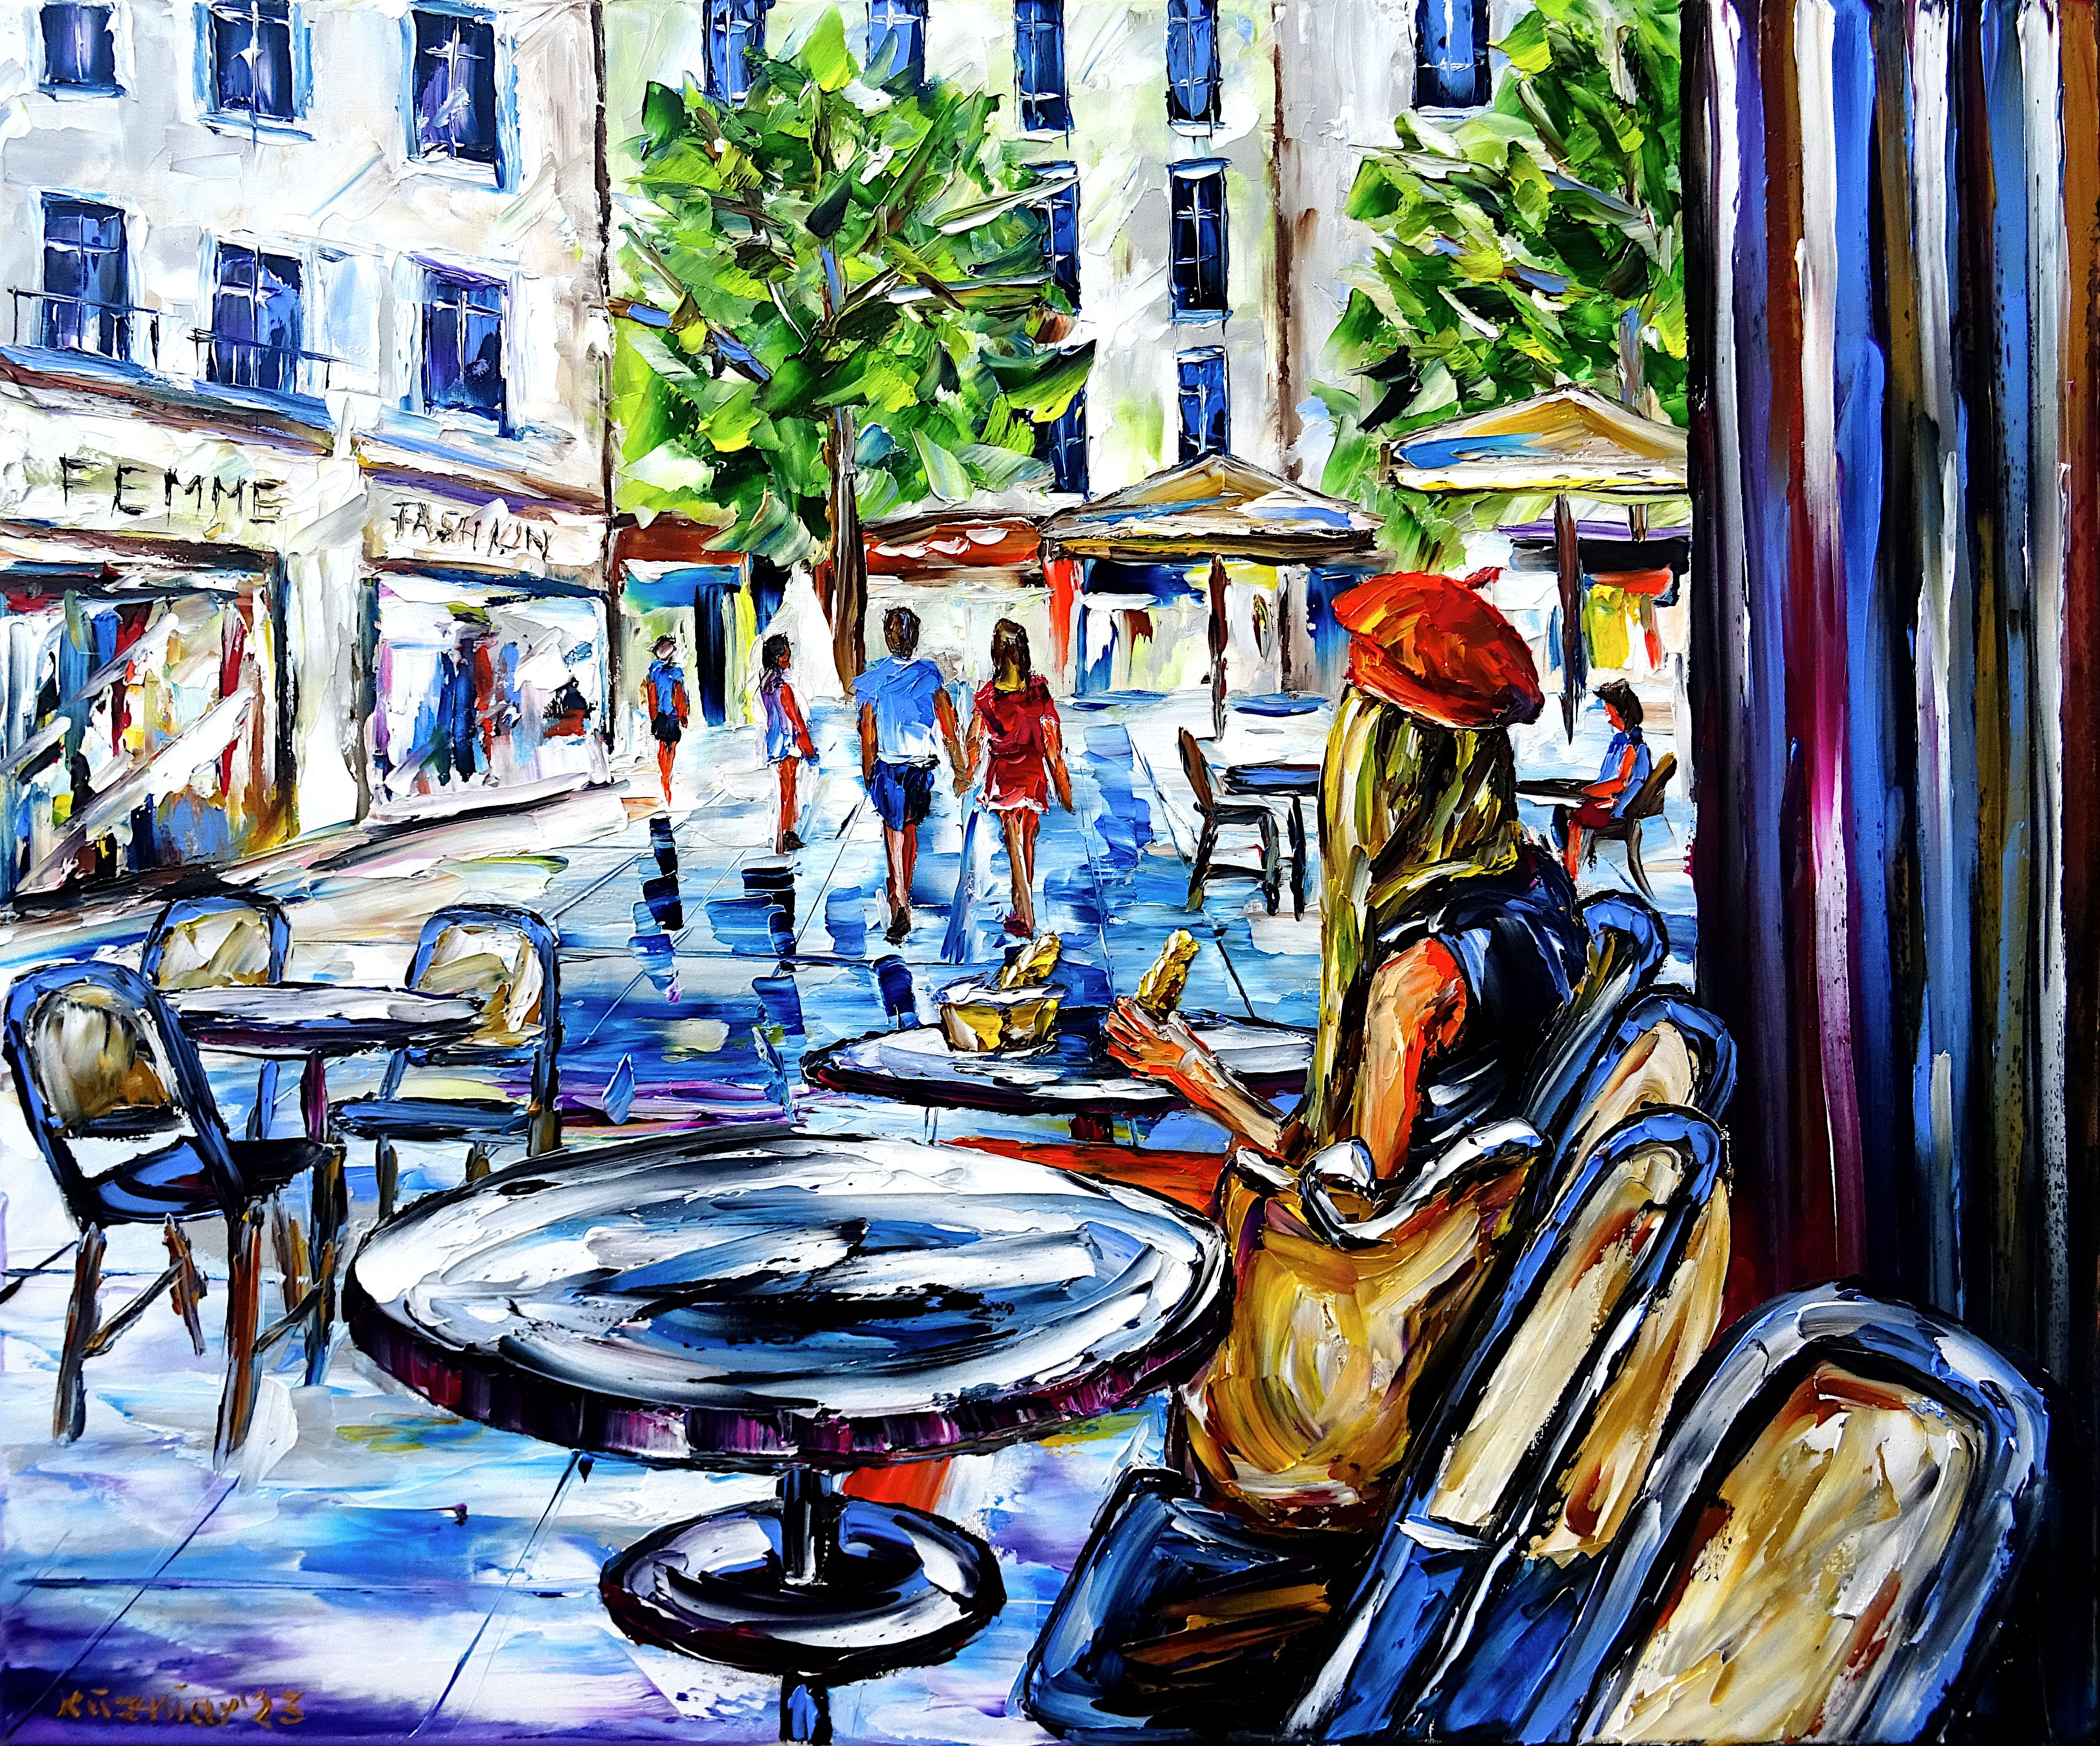 woman in café,french woman in street café,woman with beret,french woman with beret,red beret,café scene,provence,summer in provence,summer in southern france,woman with croissant,french woman with croissant,town in provence,summer picture,summer painting,sitting in street cafe,blonde french woman,beautiful france,beautiful provence,cafe picture,cafe painting,summer feelings,summer colors,colors of provence,city scenery,french life,beautiful french woman,palette knife oil painting,modern art,figurative art,figurative painting,contemporary painting,abstract painting,lively colors,colorful painting,bright colors,impasto painting